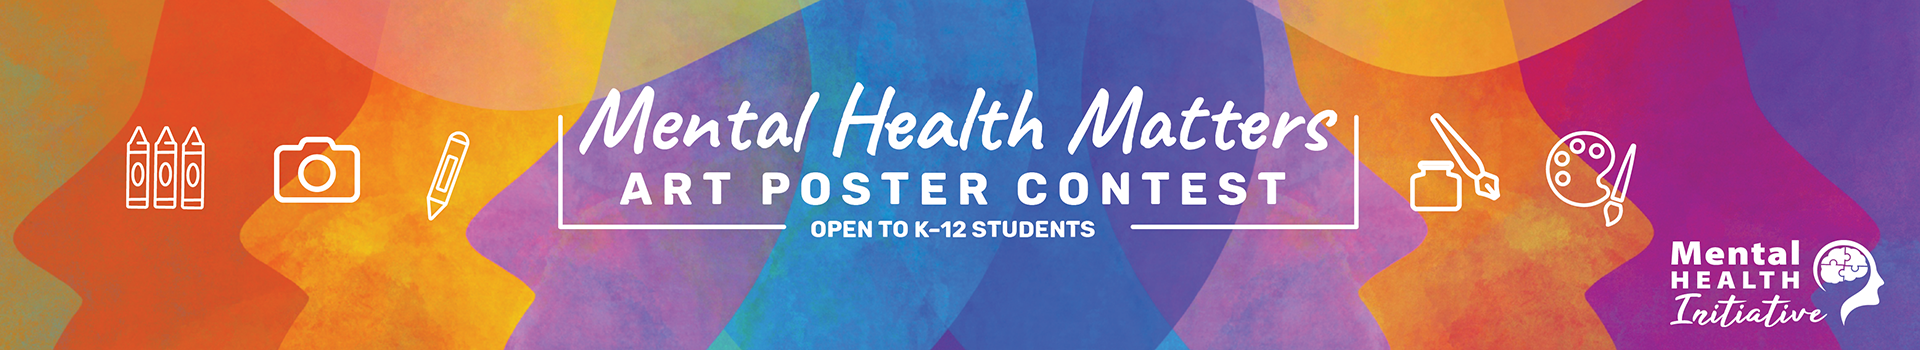 Mental Health Matters Art Poster Contest. Open to K-12 Students.